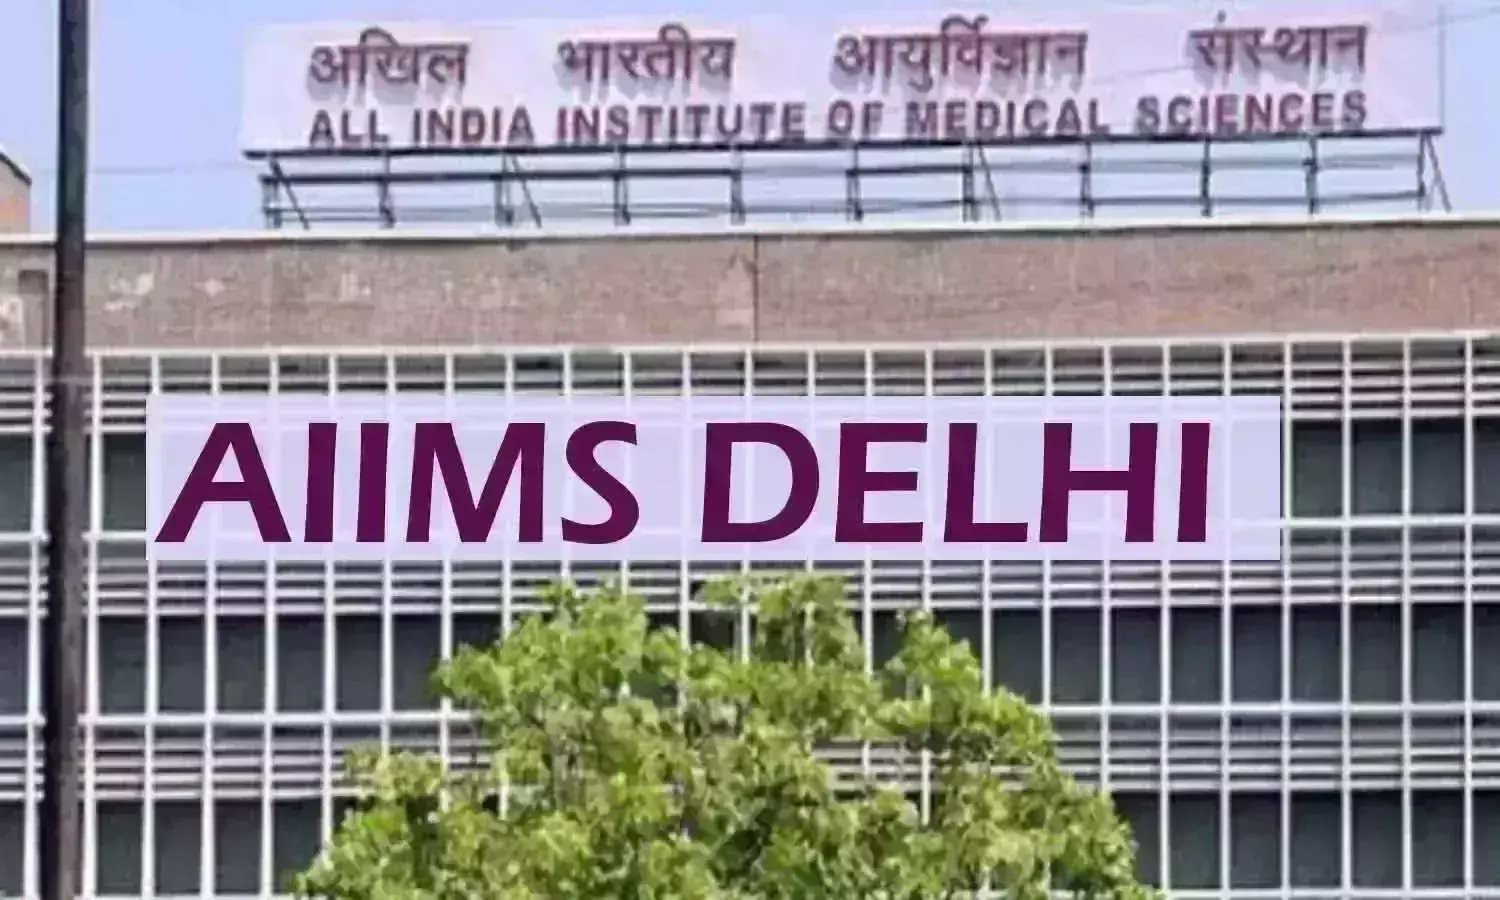 Violation of food safety norms at AIIMS Delhi Mess? Doctors forum seeks immediate action